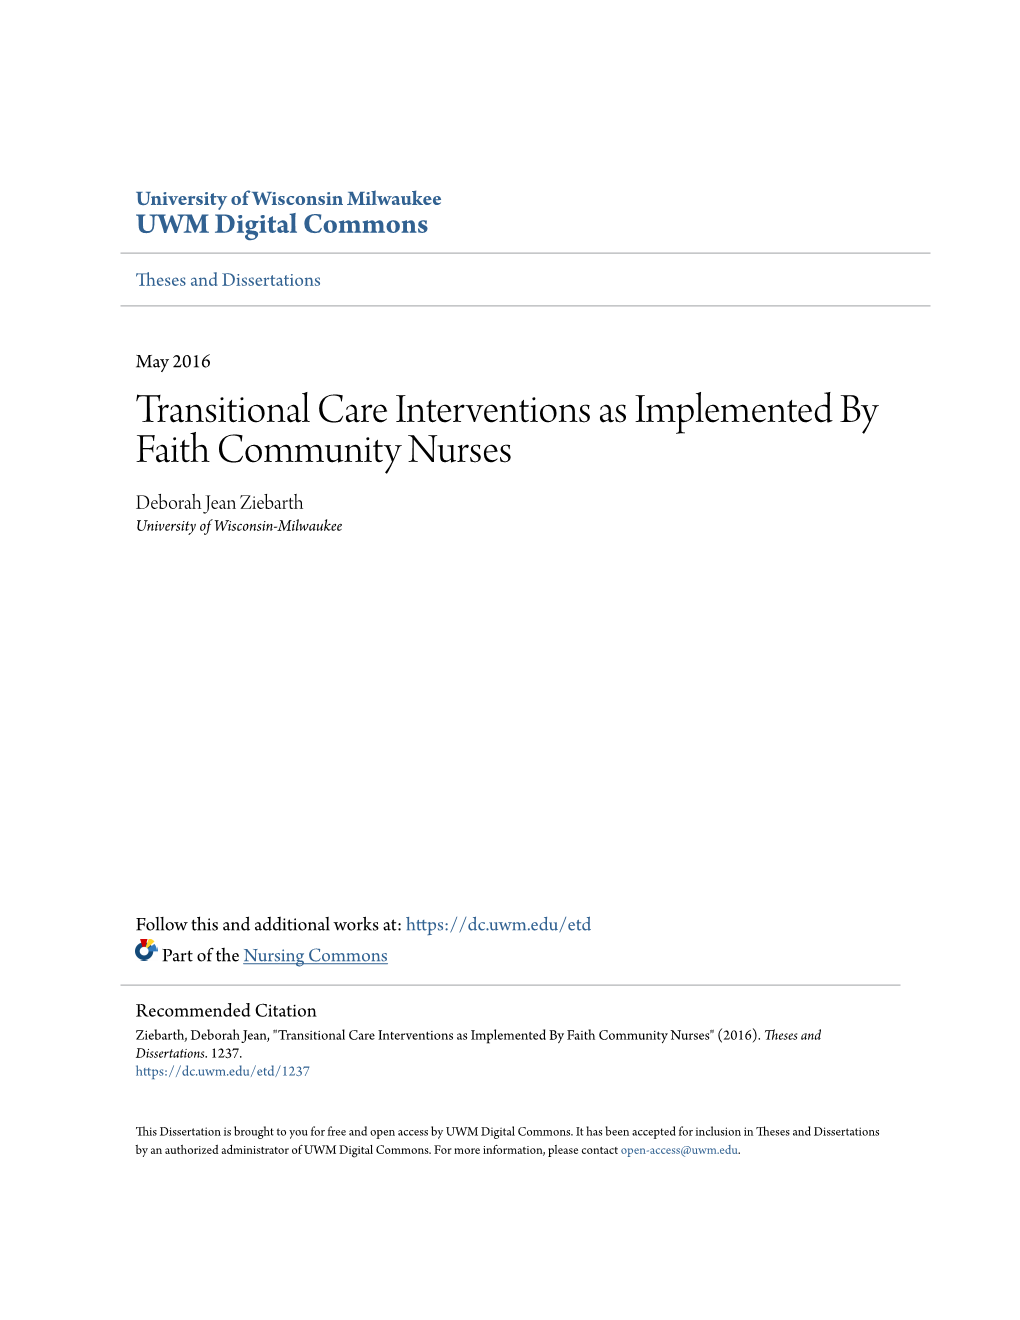 Transitional Care Interventions As Implemented by Faith Community Nurses Deborah Jean Ziebarth University of Wisconsin-Milwaukee